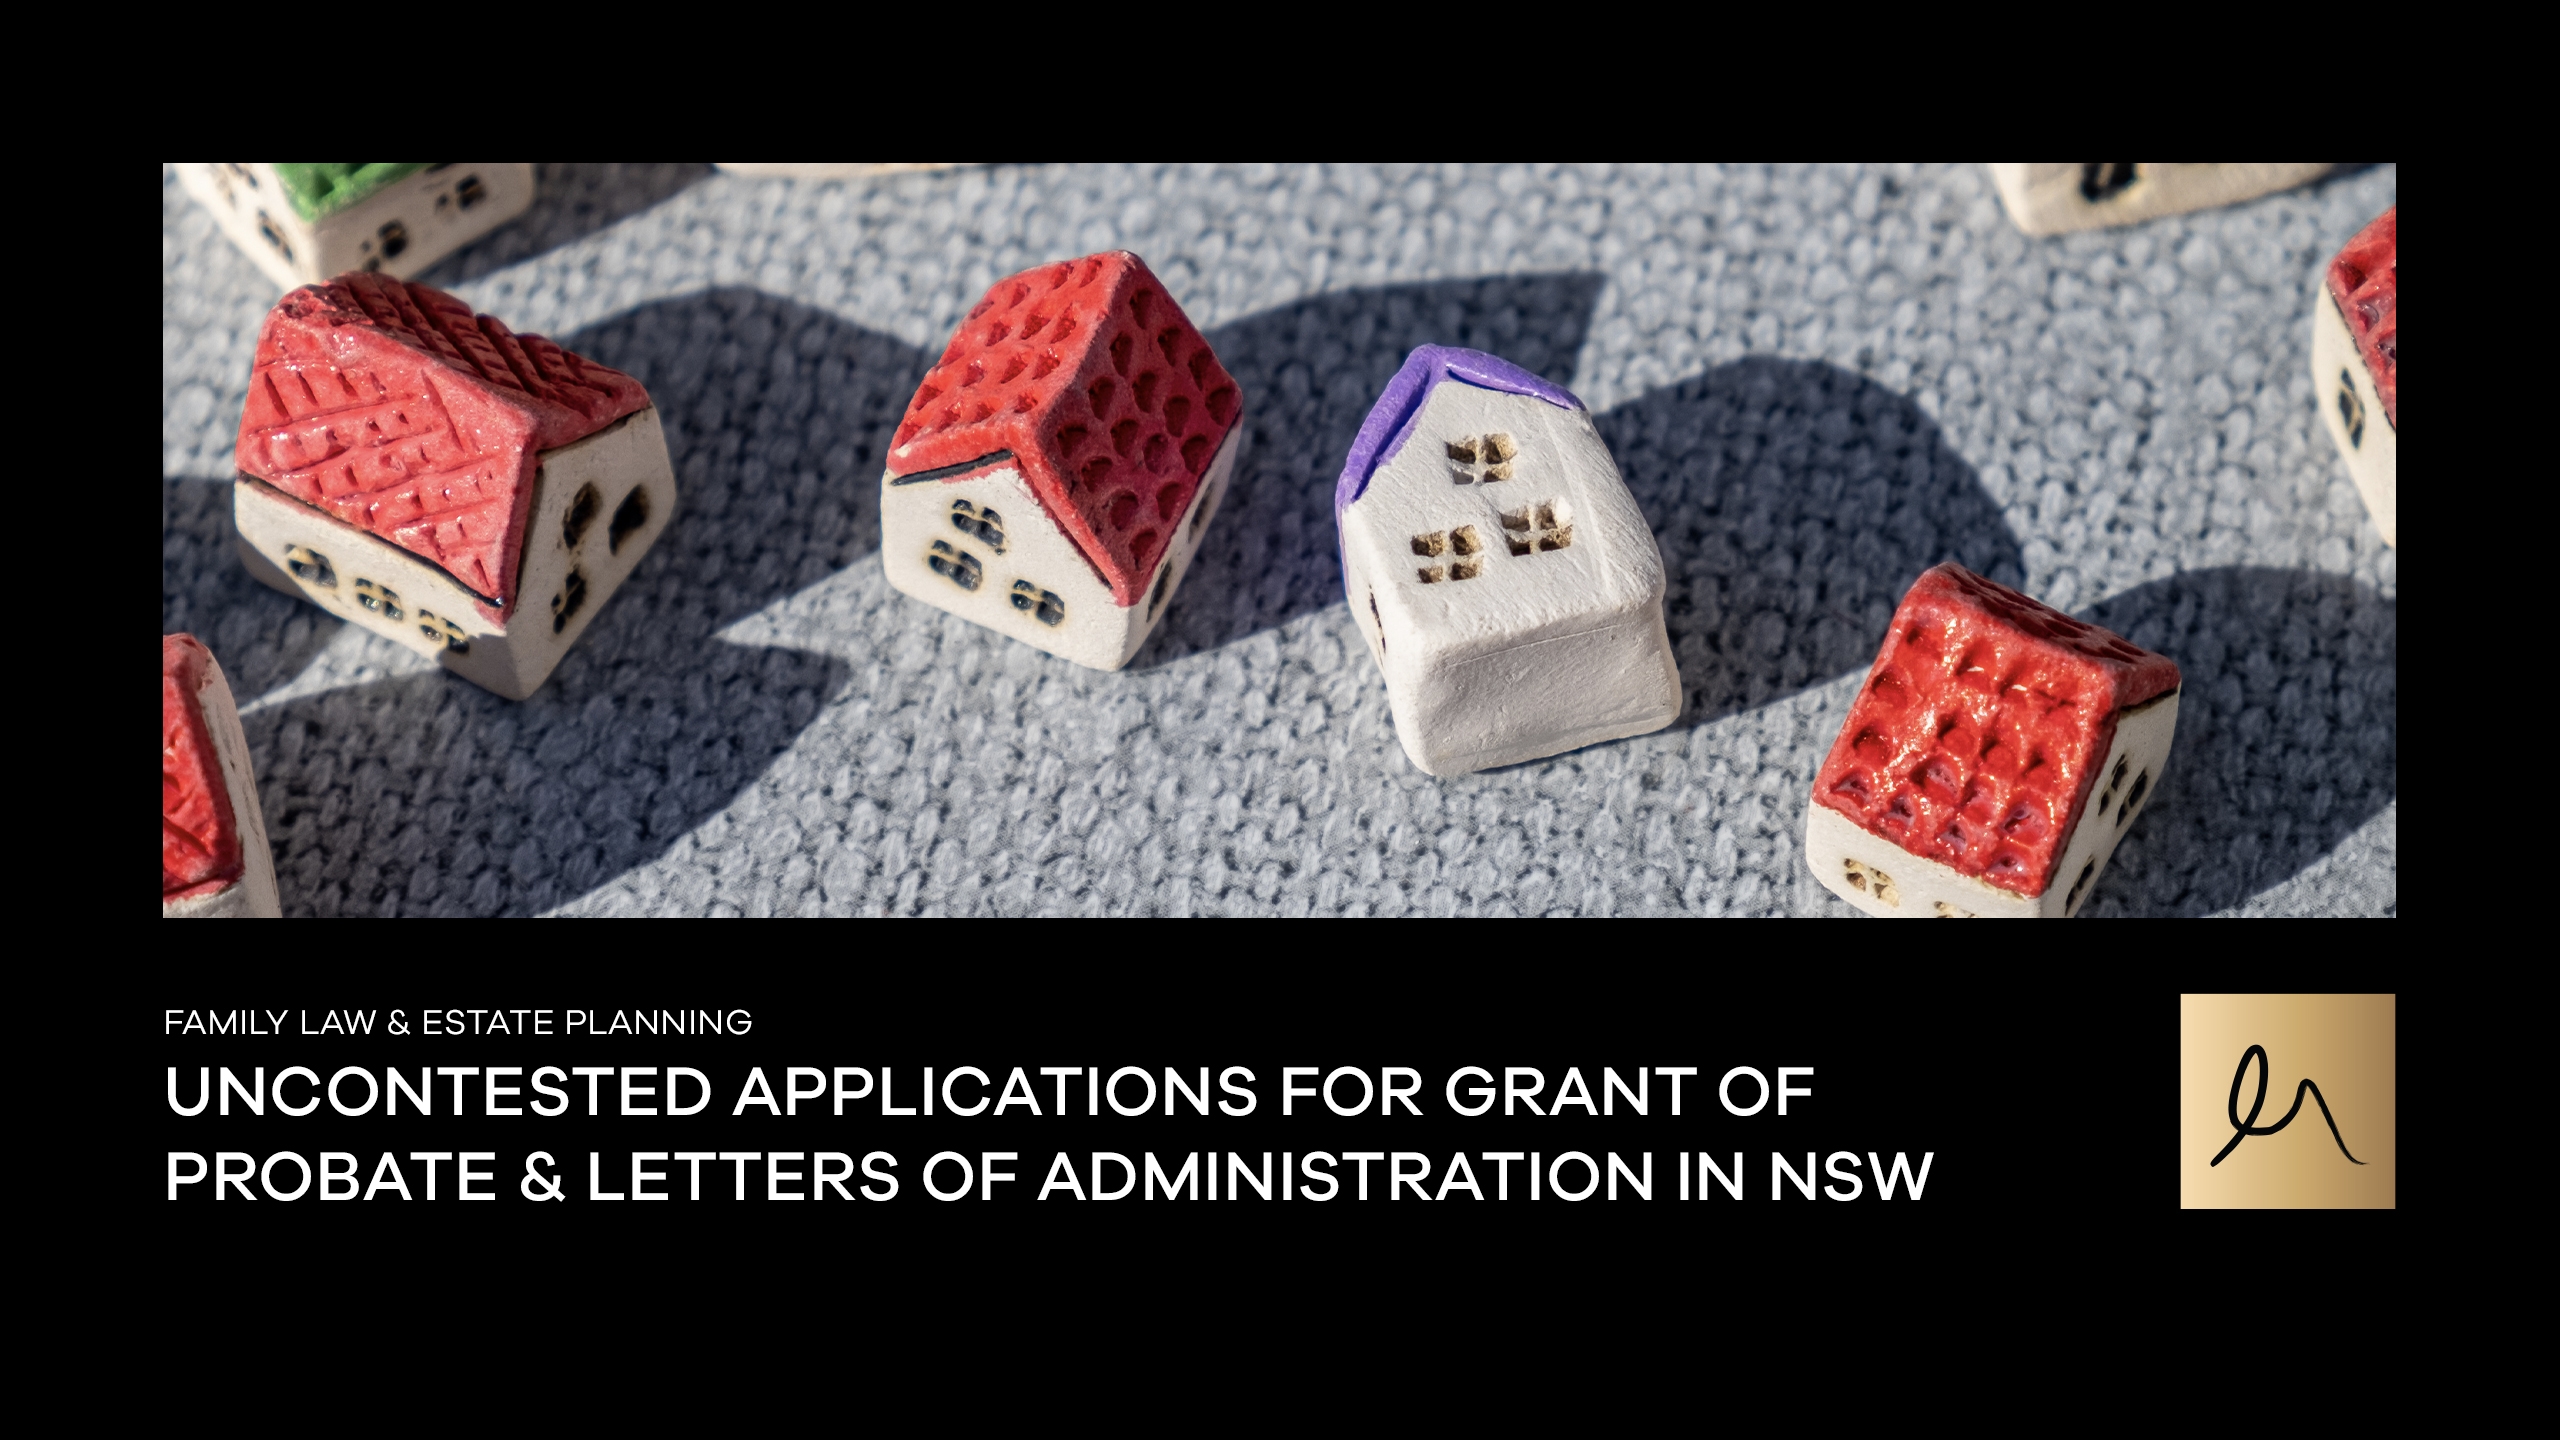 UNCONTESTED APPLICATIONS FOR GRANT OF PROBATE & LETTERS OF ADMINISTRATION IN NSW